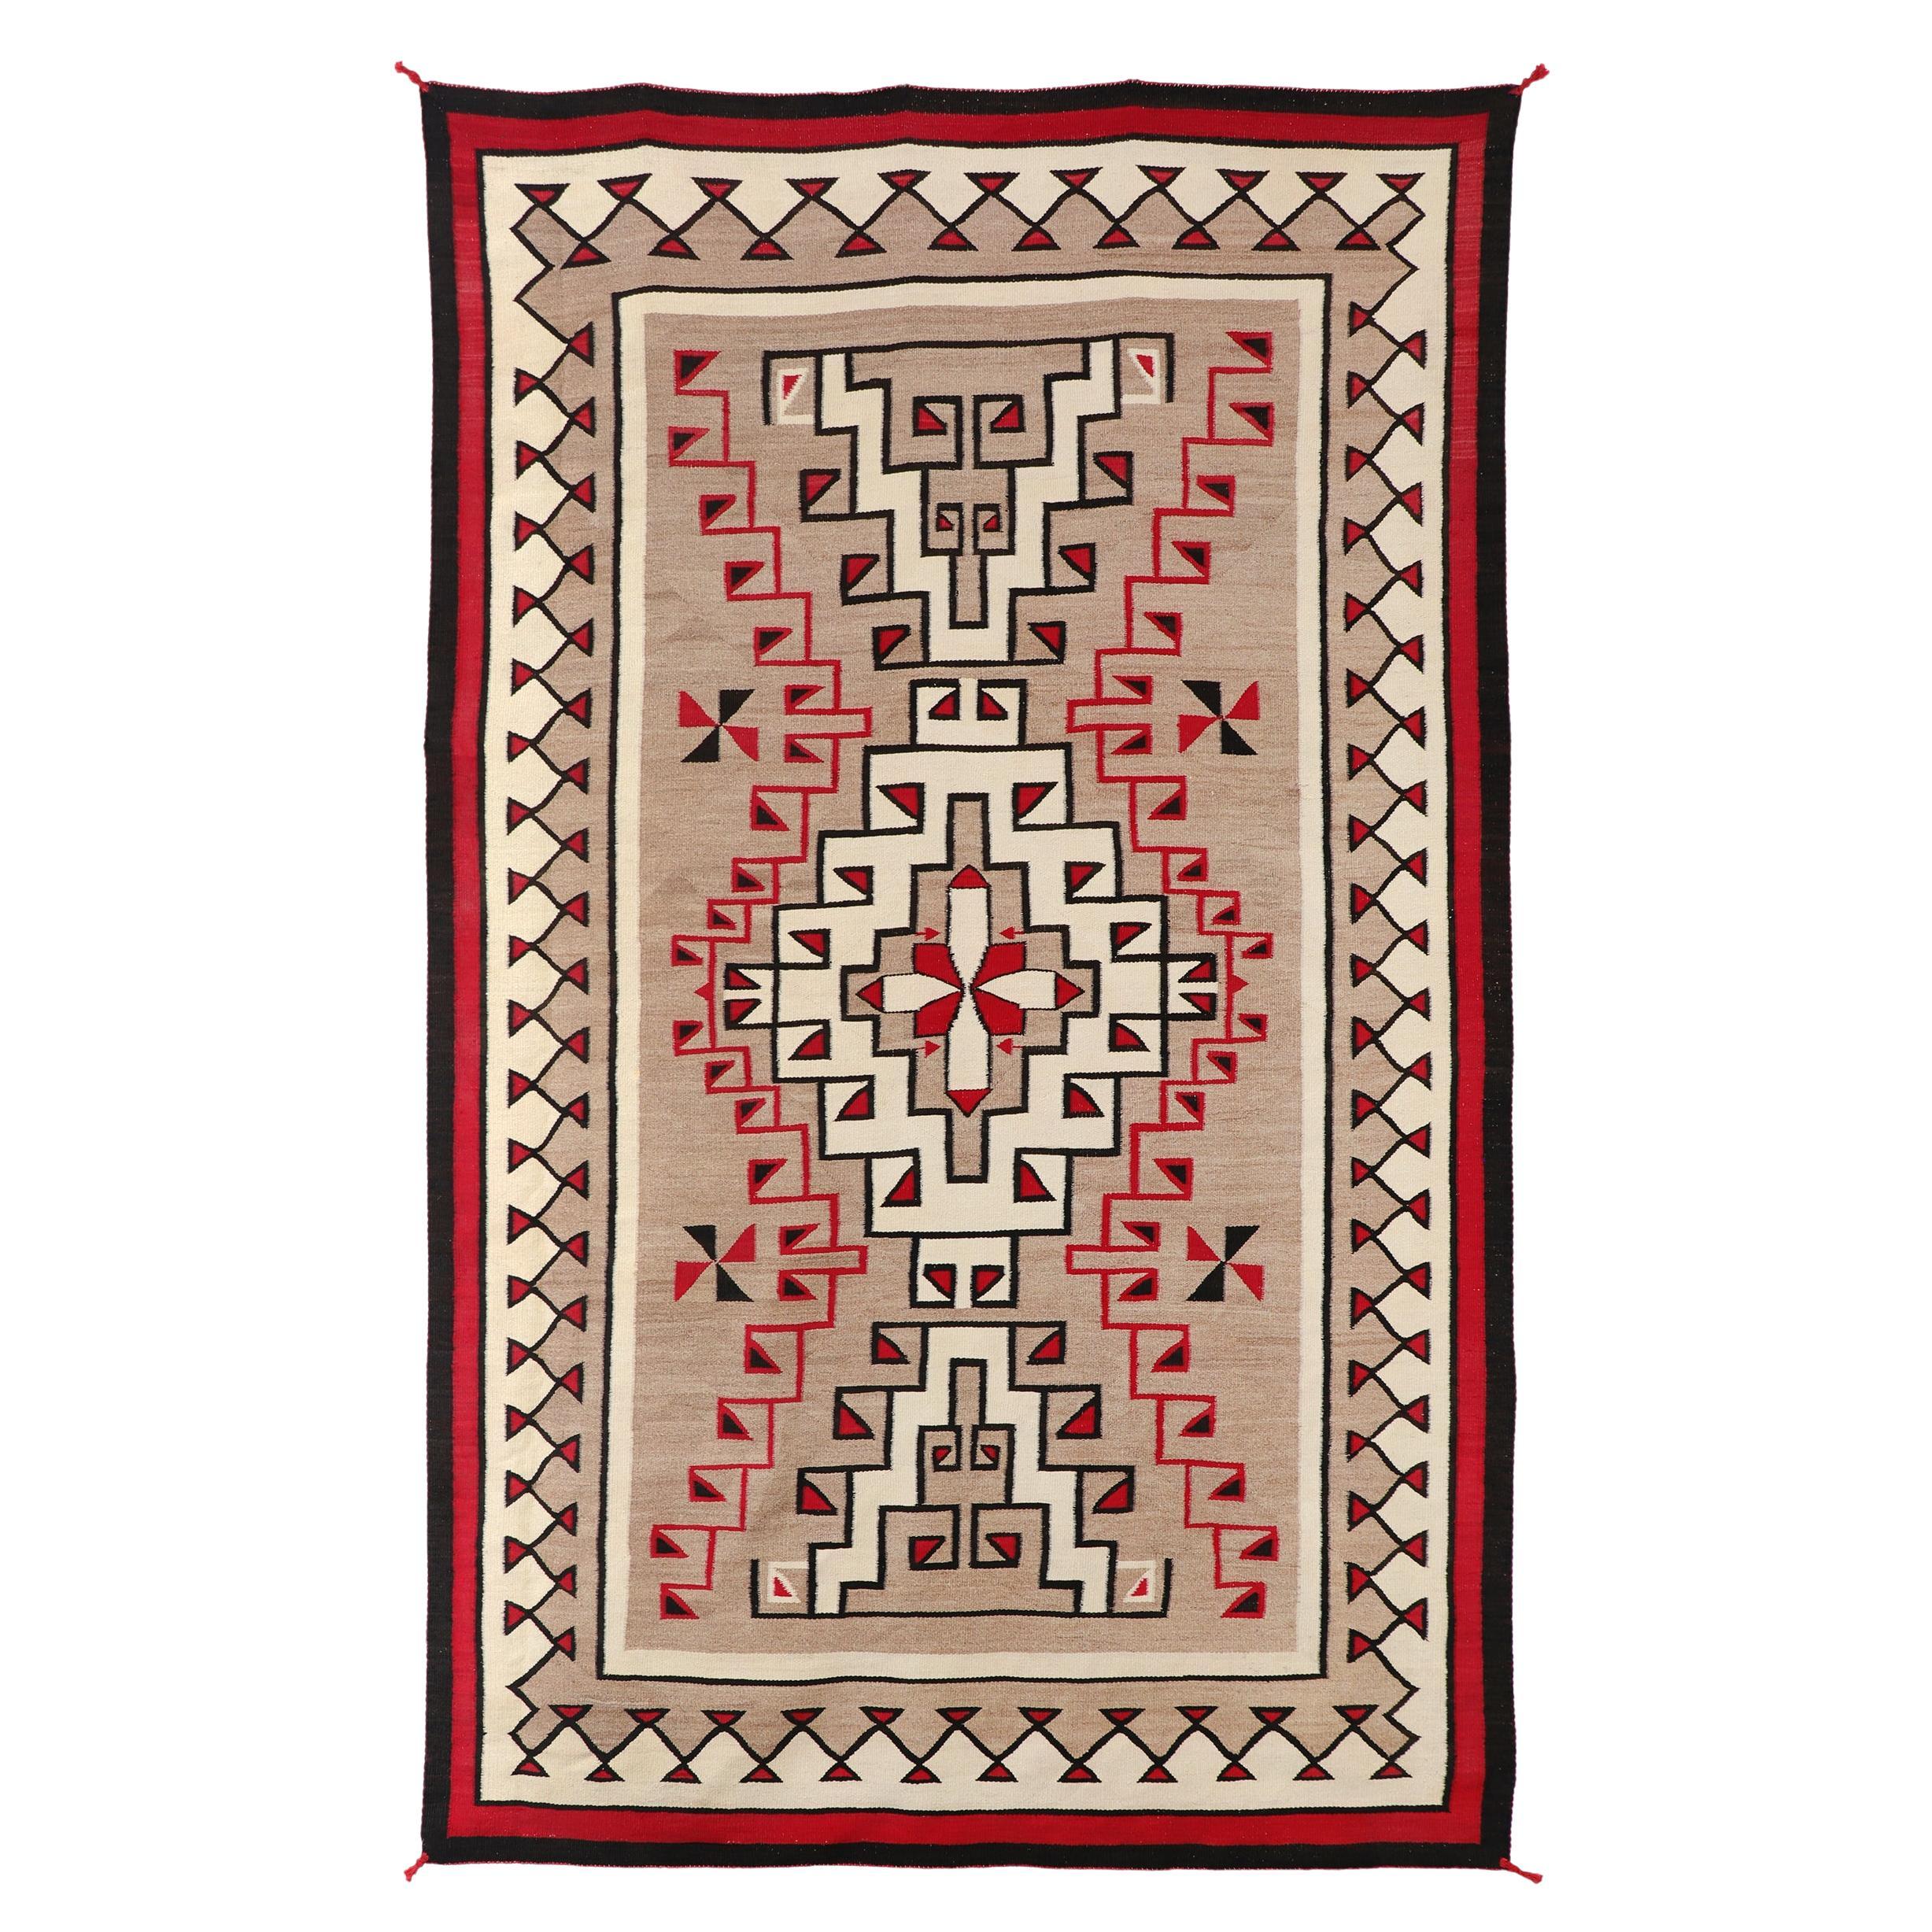 Navajo Trading Post Era Rug with Storm Pattern, Floor/Wall Hanging, Red Black